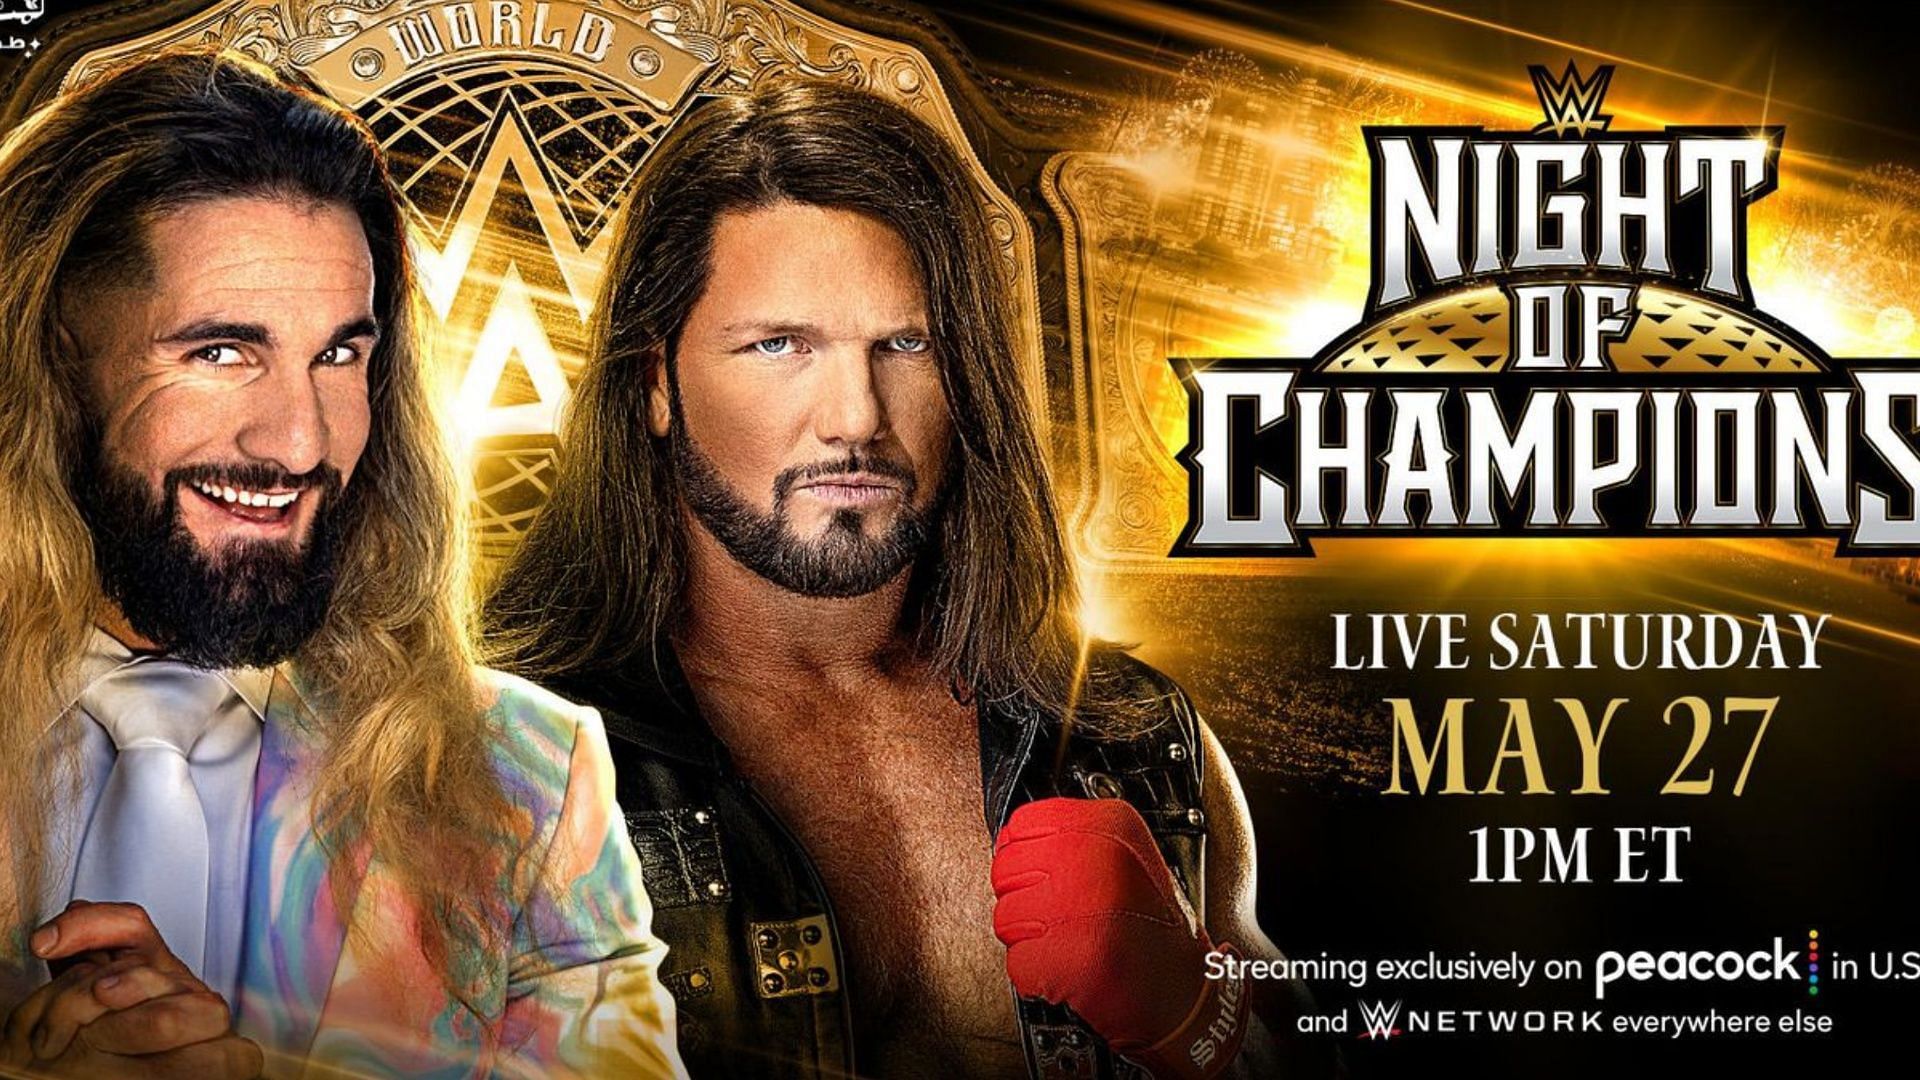 WWE Night of Champions 2023 will see a title match between Seth Rollins and AJ Styles.